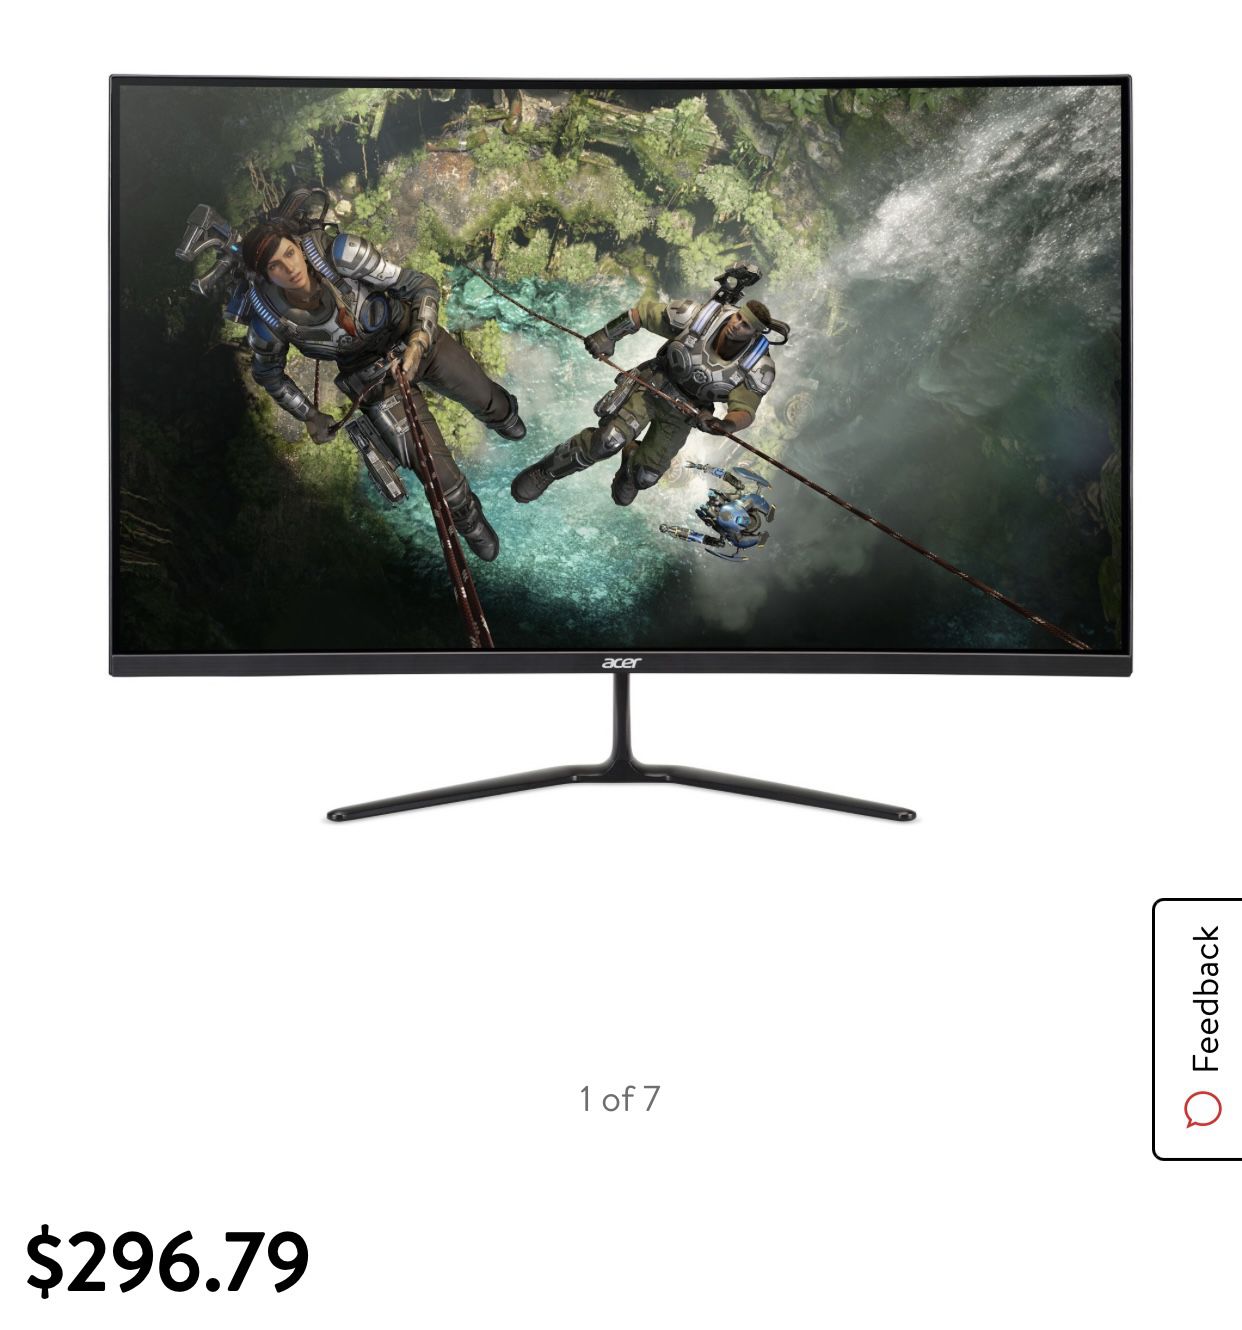 BRAND NEW Acer 32” Curved monitor